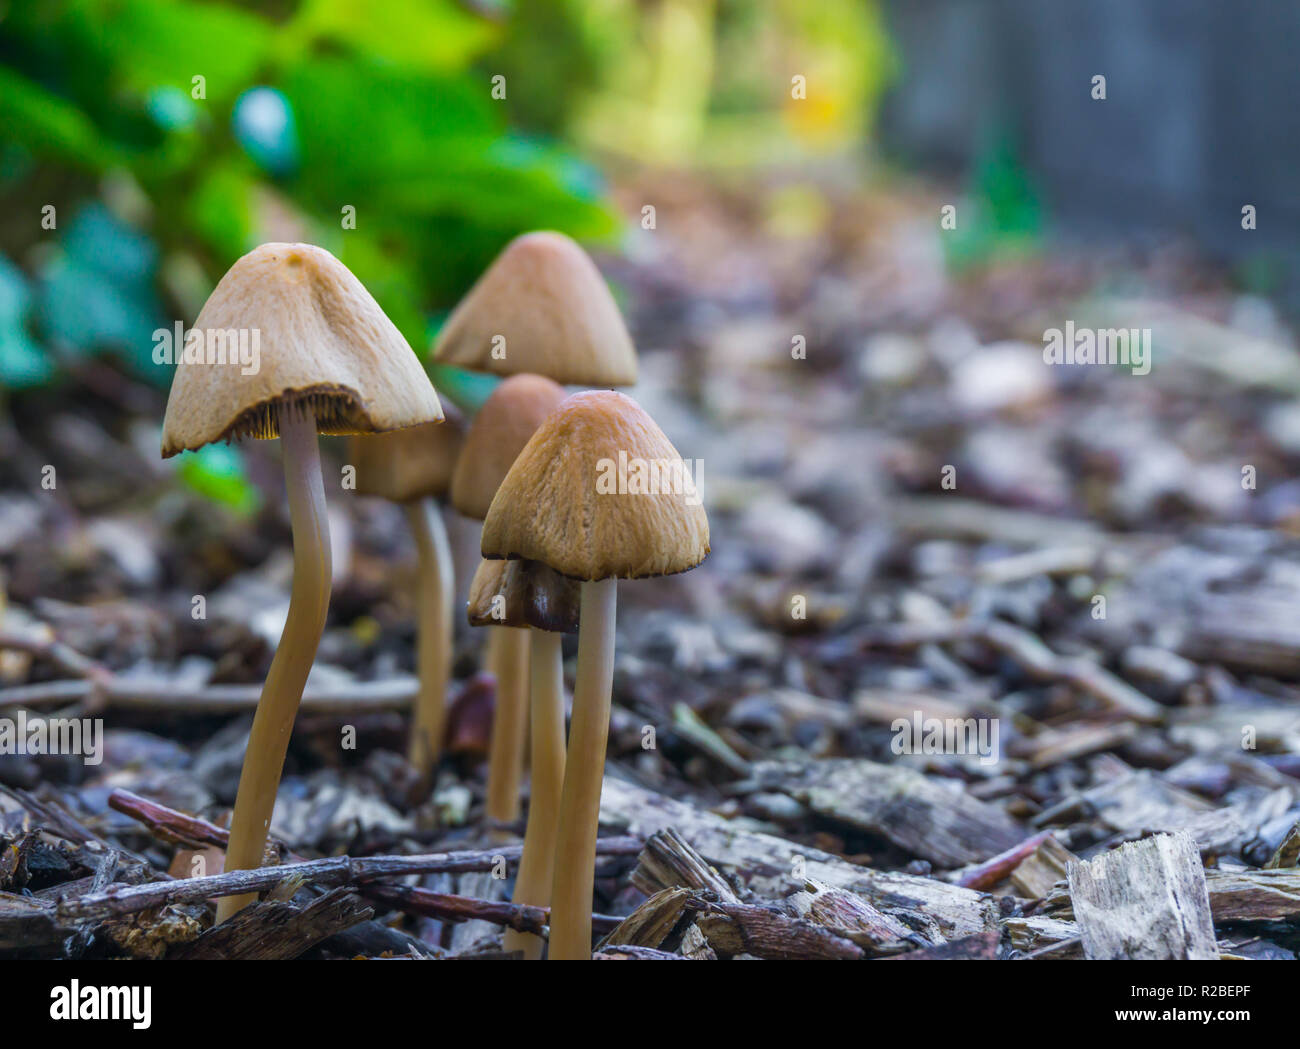 autumn season group of white dunce cap mushrooms with bell shaped caps growing together in some wood chips Stock Photo